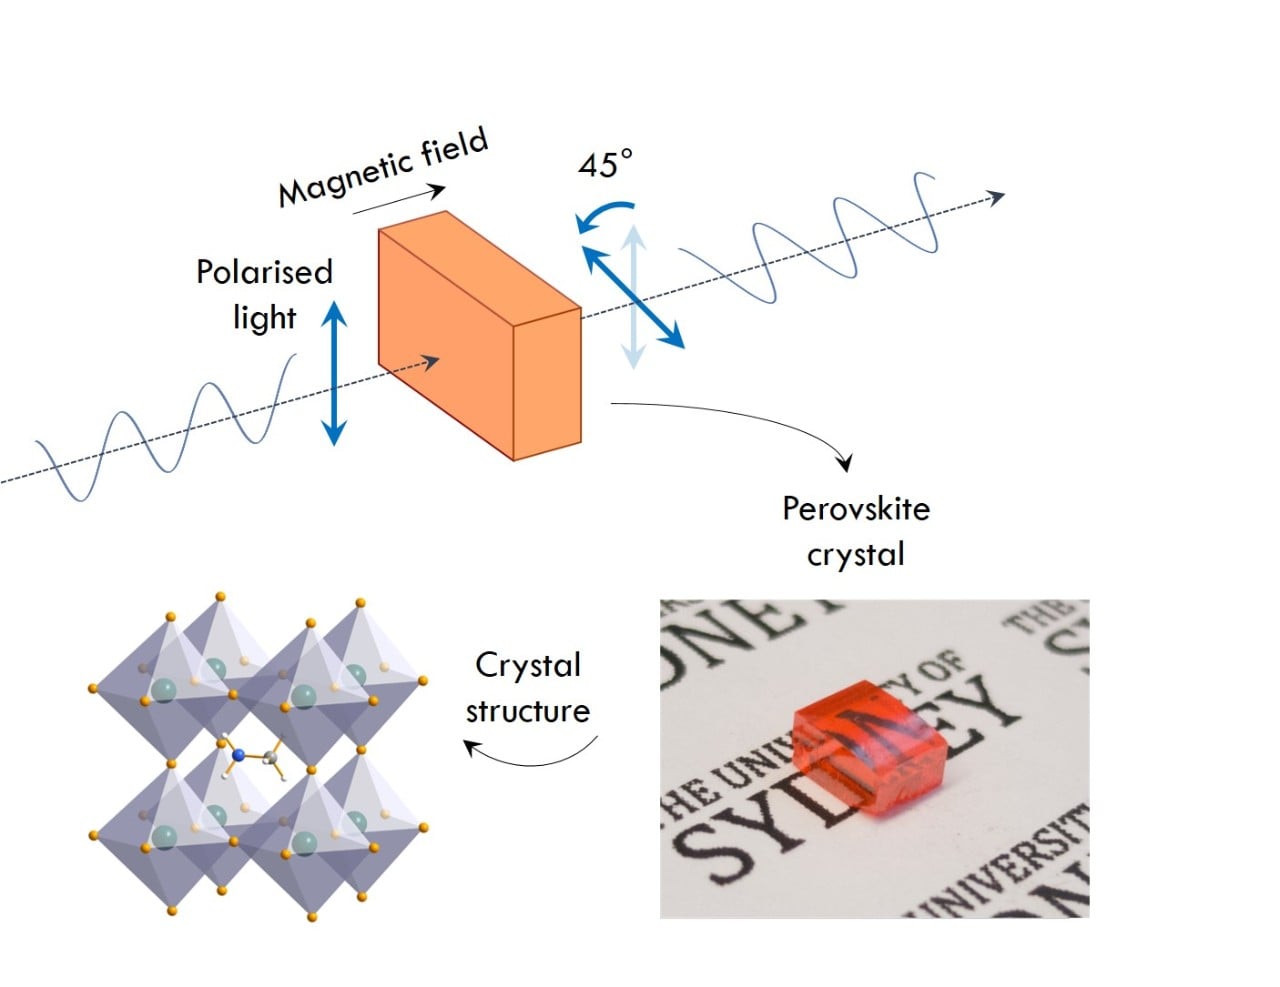 Image above: The polarisation of transmitted light is rotated by a crystal immersed in a magnetic field (top). The perovskite crystal (bottom right) rotates light very effectively, due to the atomic configuration of its crystal structure (bottom left).